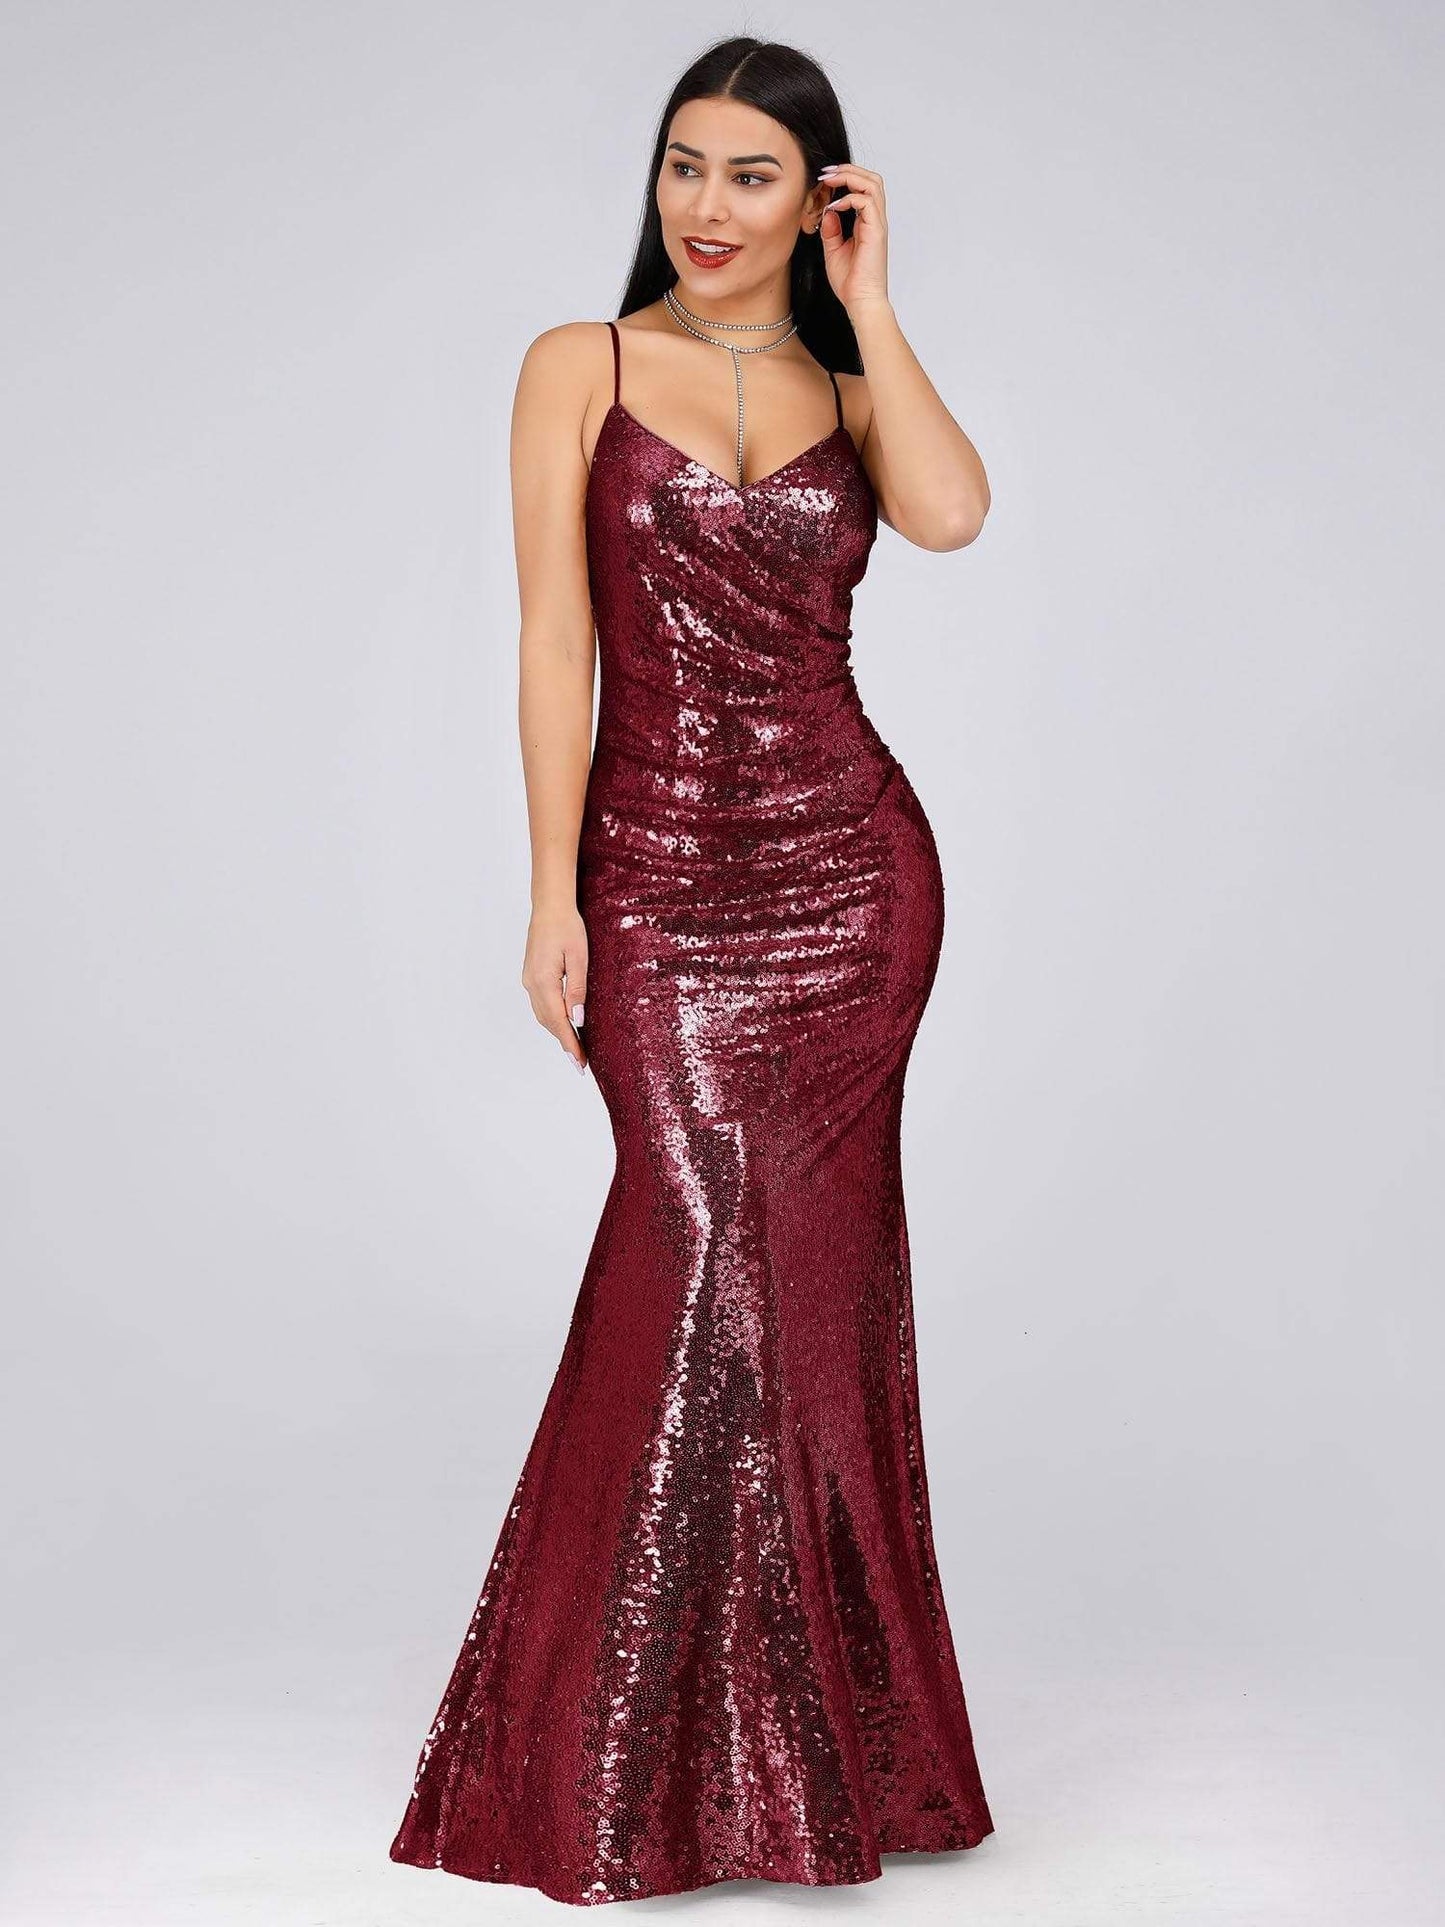 Spaghetti Straps Fishtail Sequin Evening Gown Style EP07339 - MISS LESTER'S 